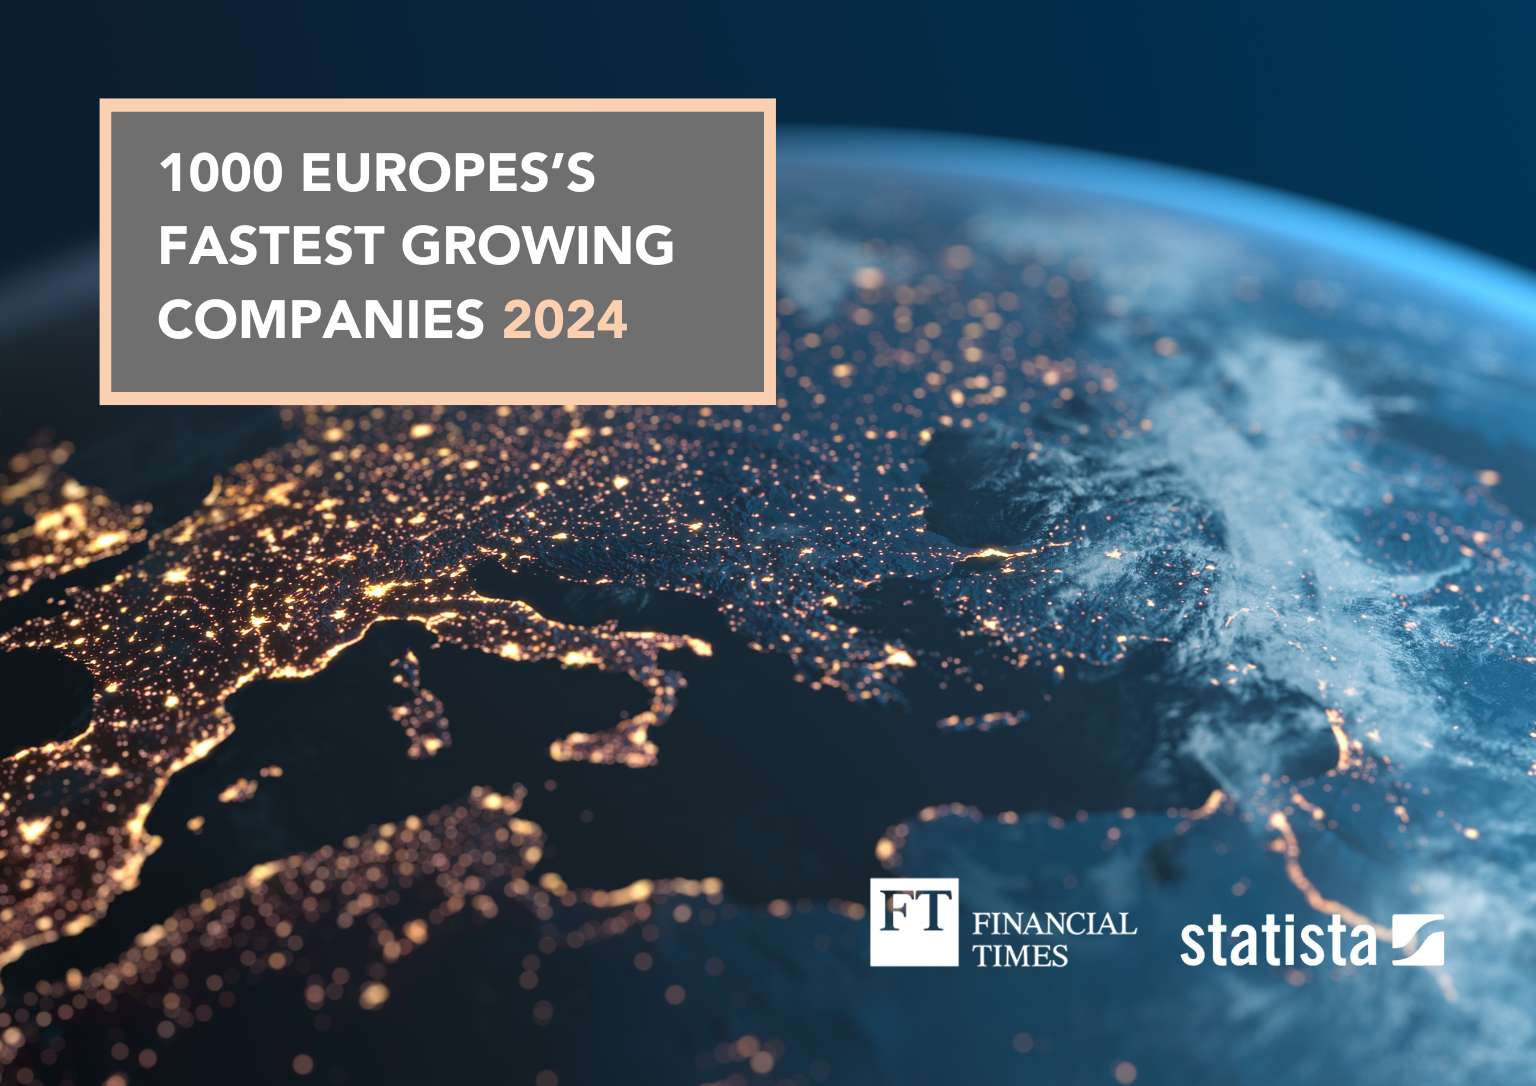 Draivi has made it to the annual FT1000 Europe’s Fastest Growing Companies 2024 list